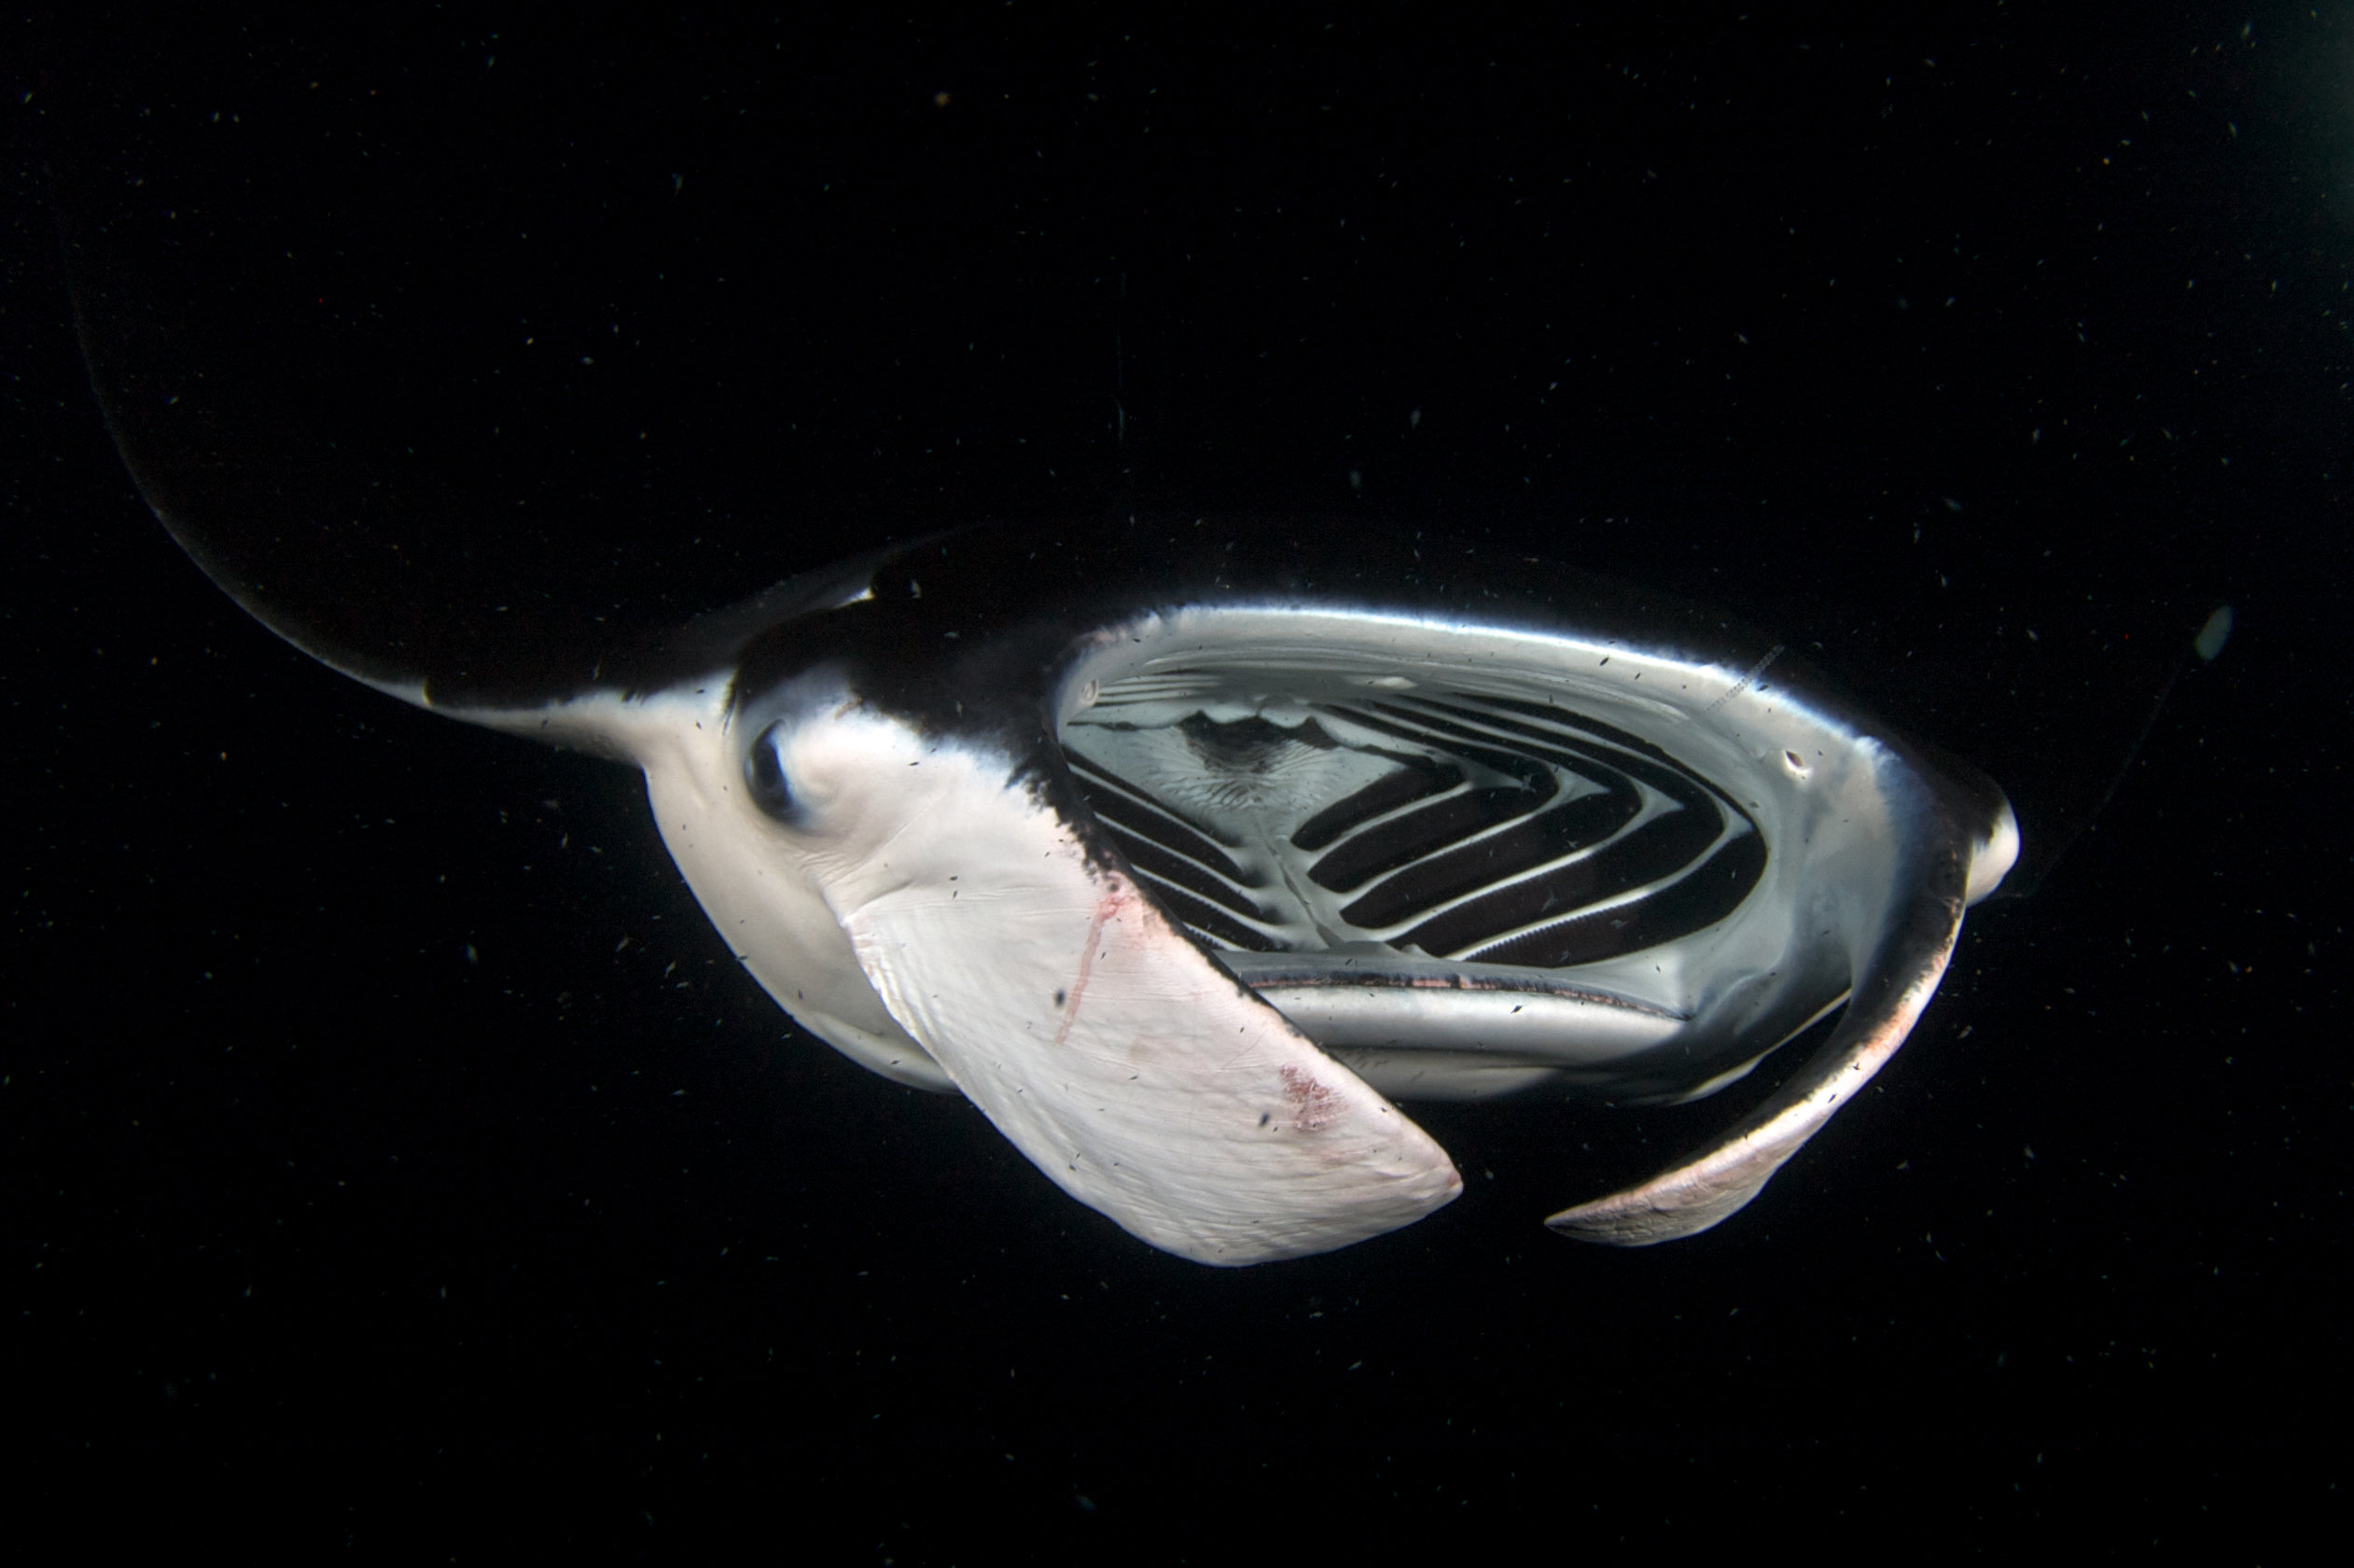 Manta rays' food-capturing mechanism may hold key to better filtration systems